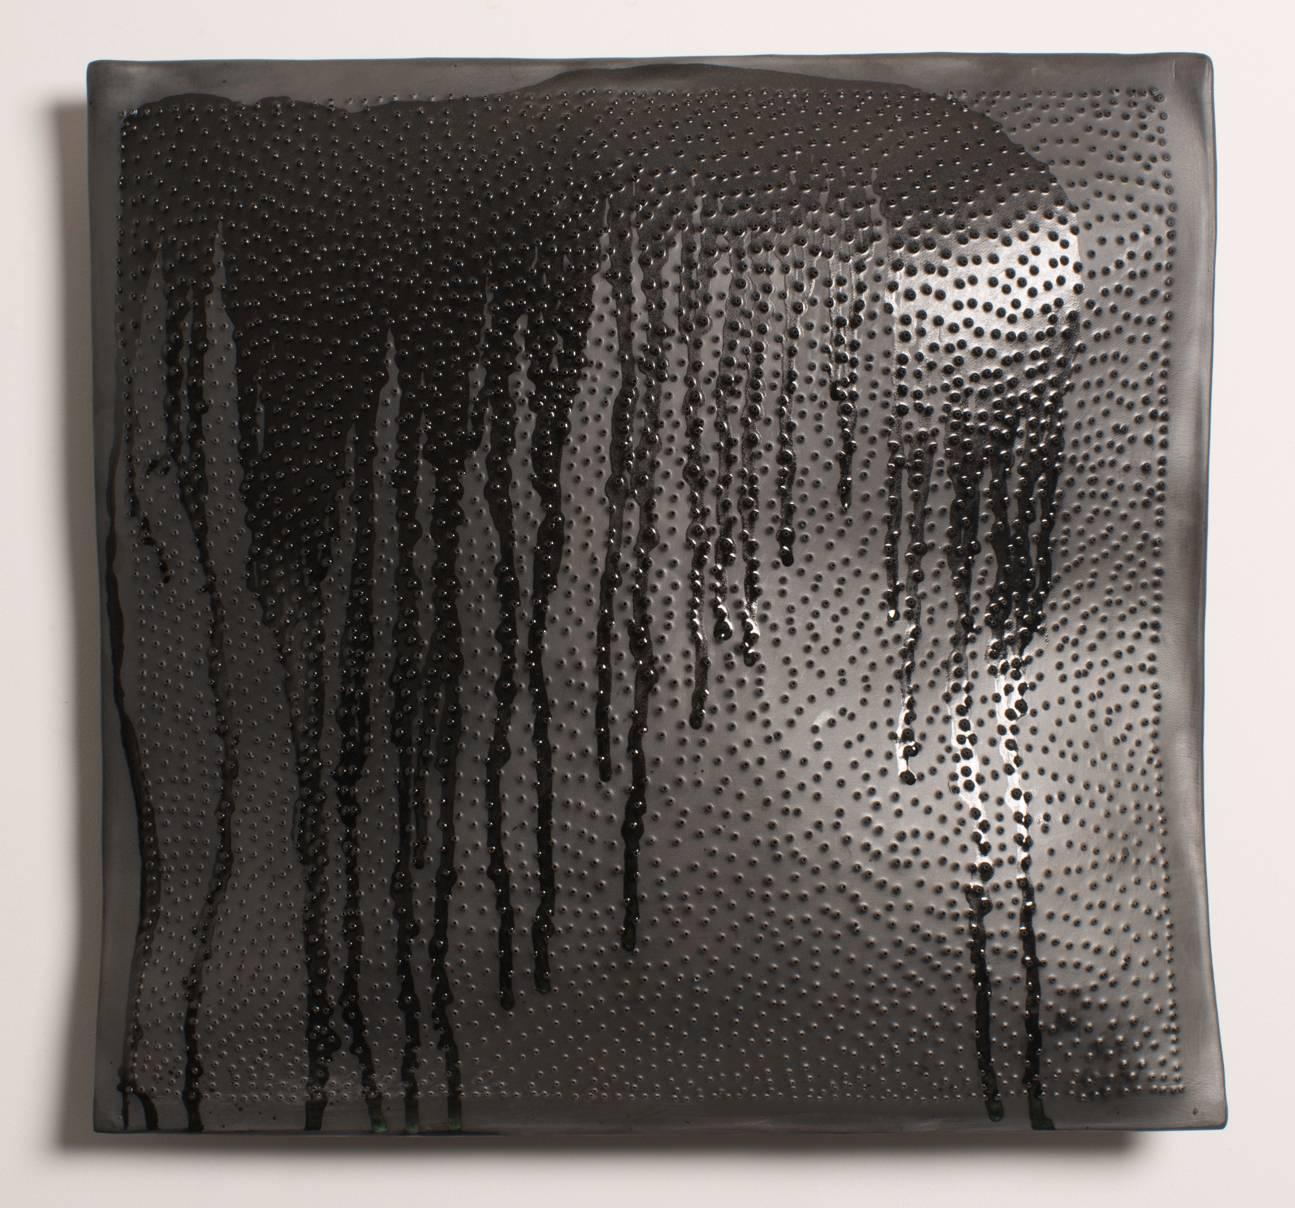 Stepanka Horalkova Abstract Sculpture - Black Porcelain pillows with drips, Color Study